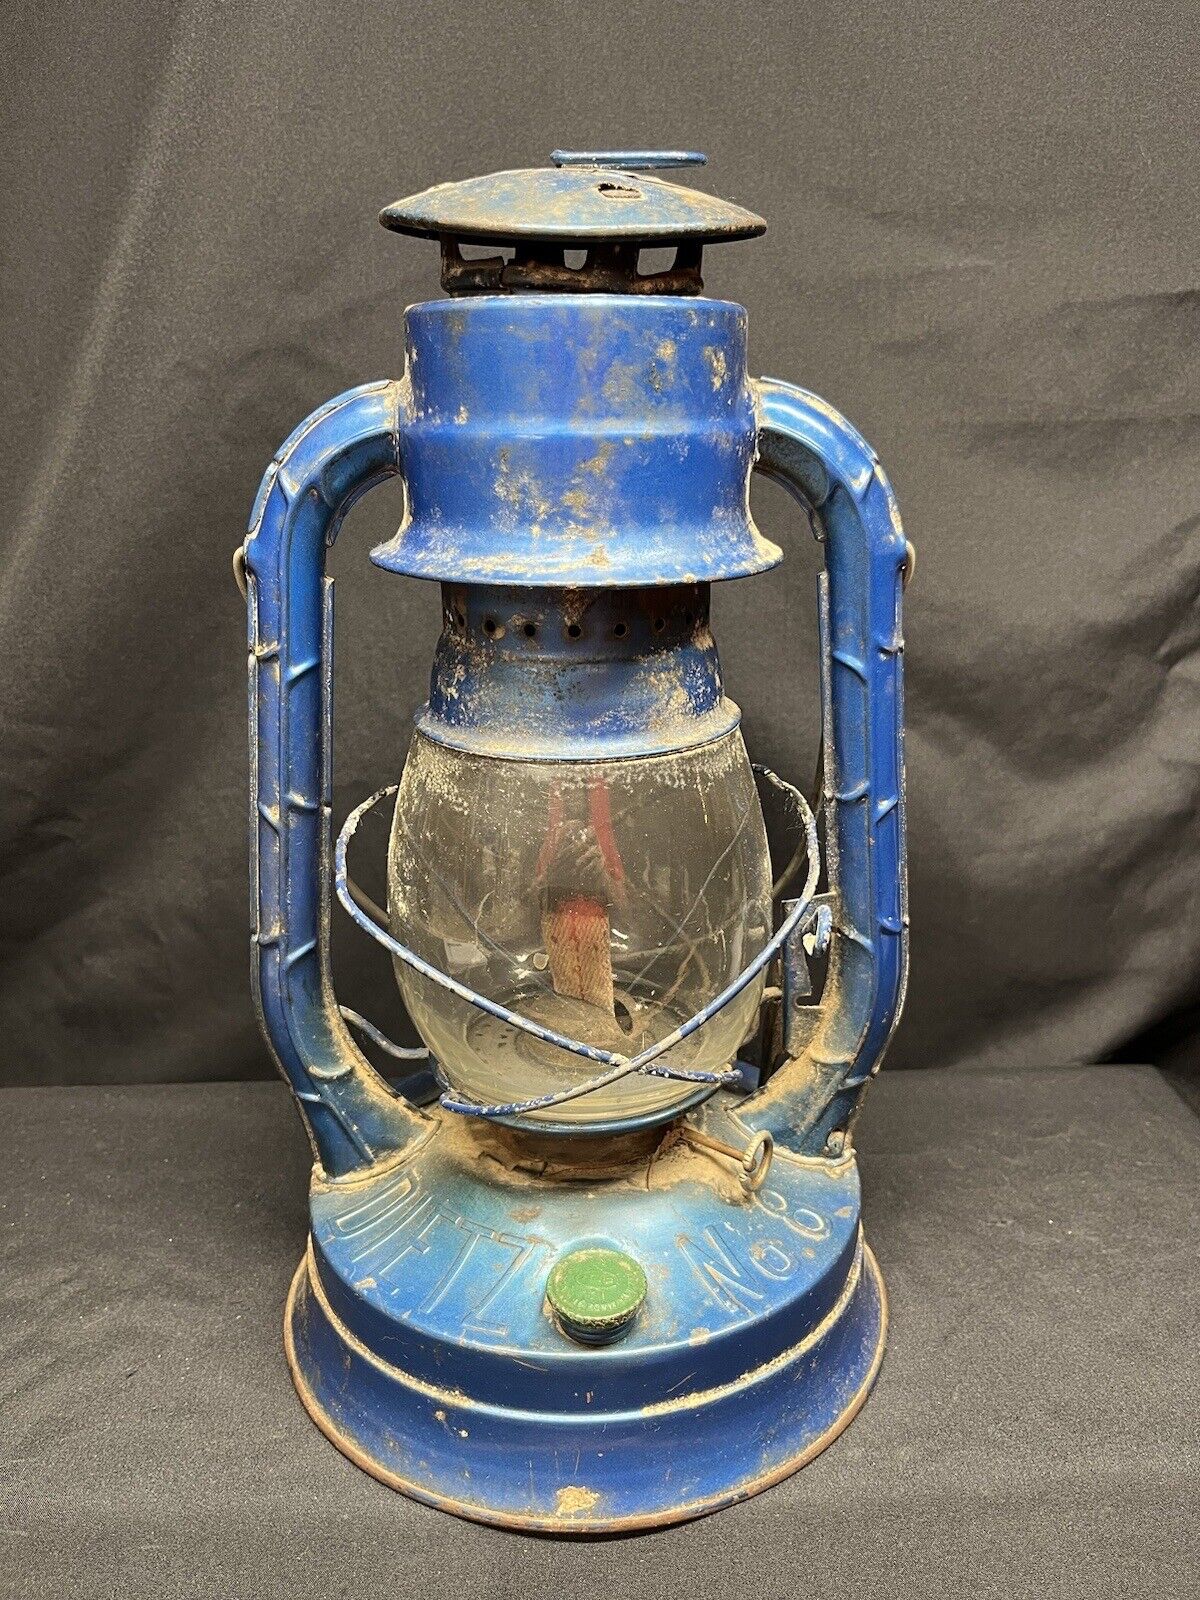 Vintage Dietz NO 8 Oil Lantern Air Pilot Pre Owned Made In Hong Kong.